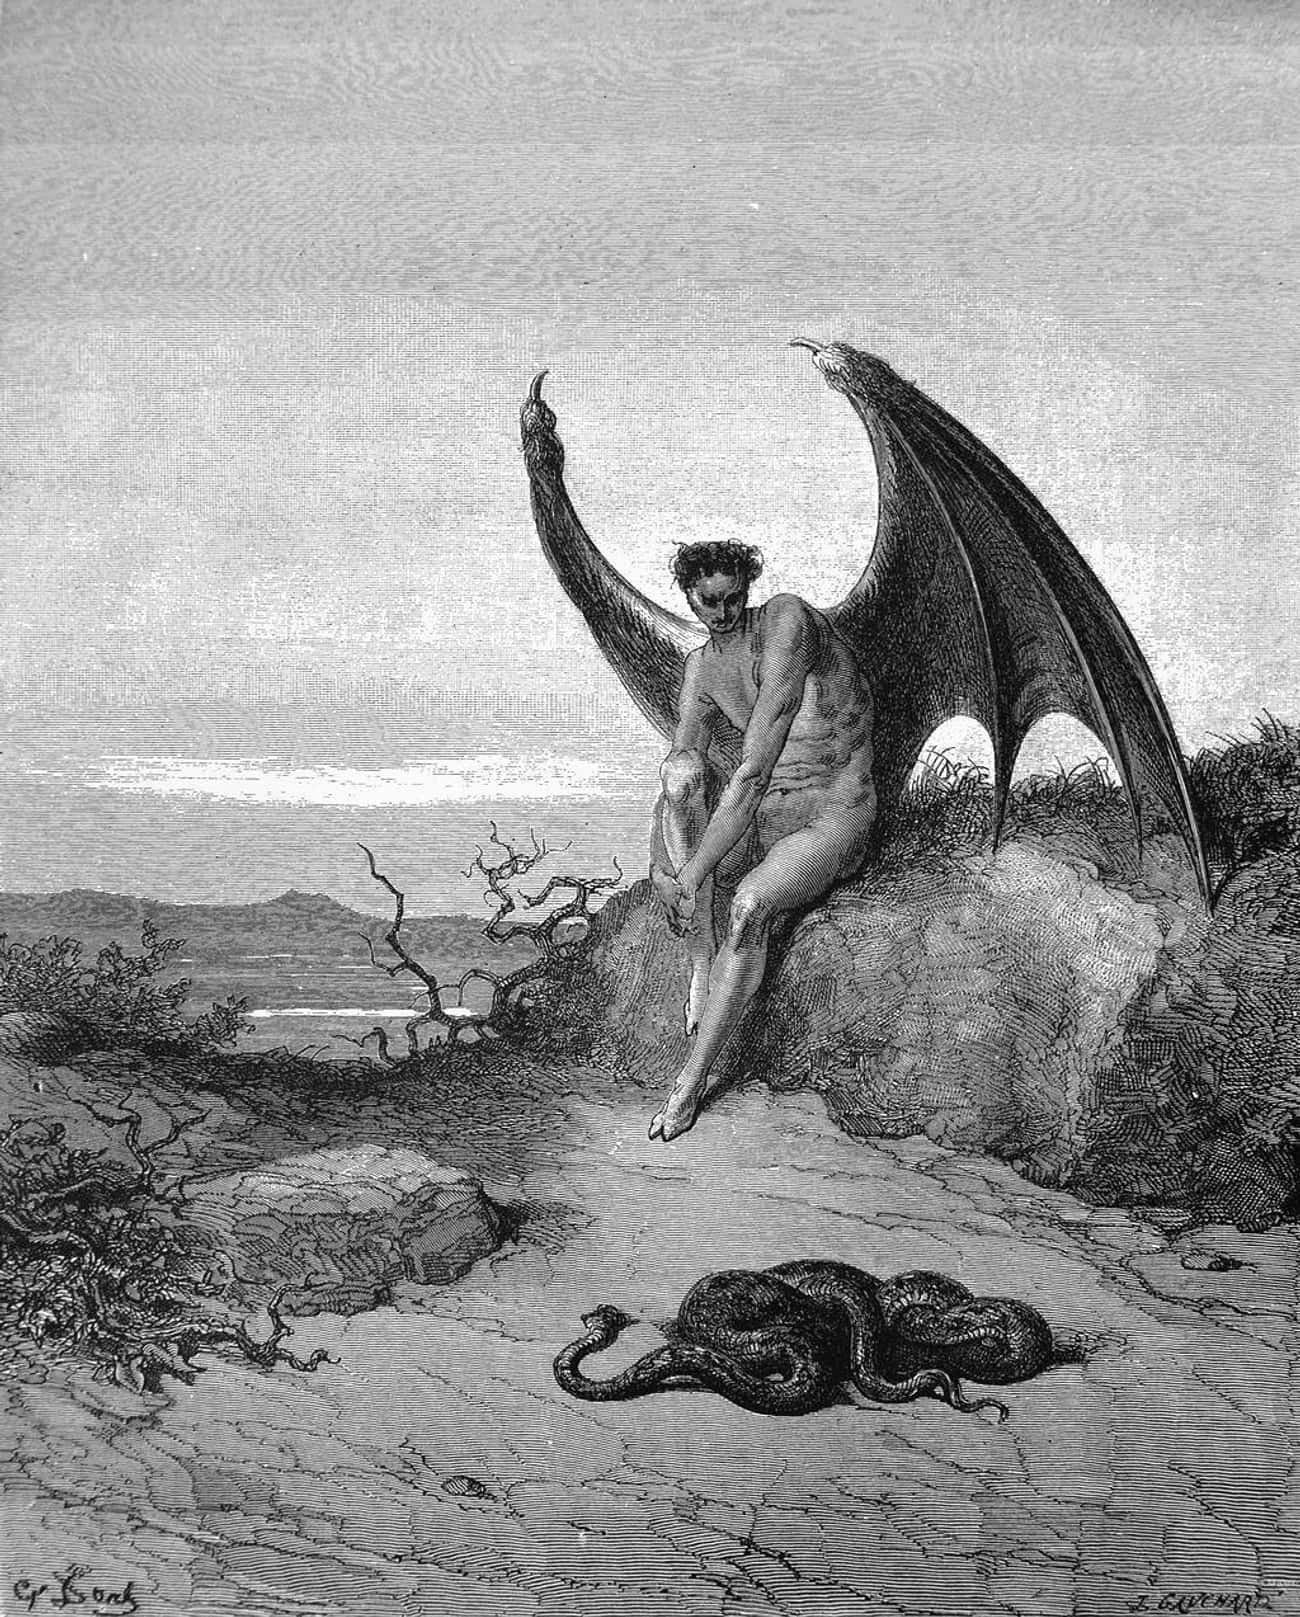 Why Do We Think The Devil Was A Snake?